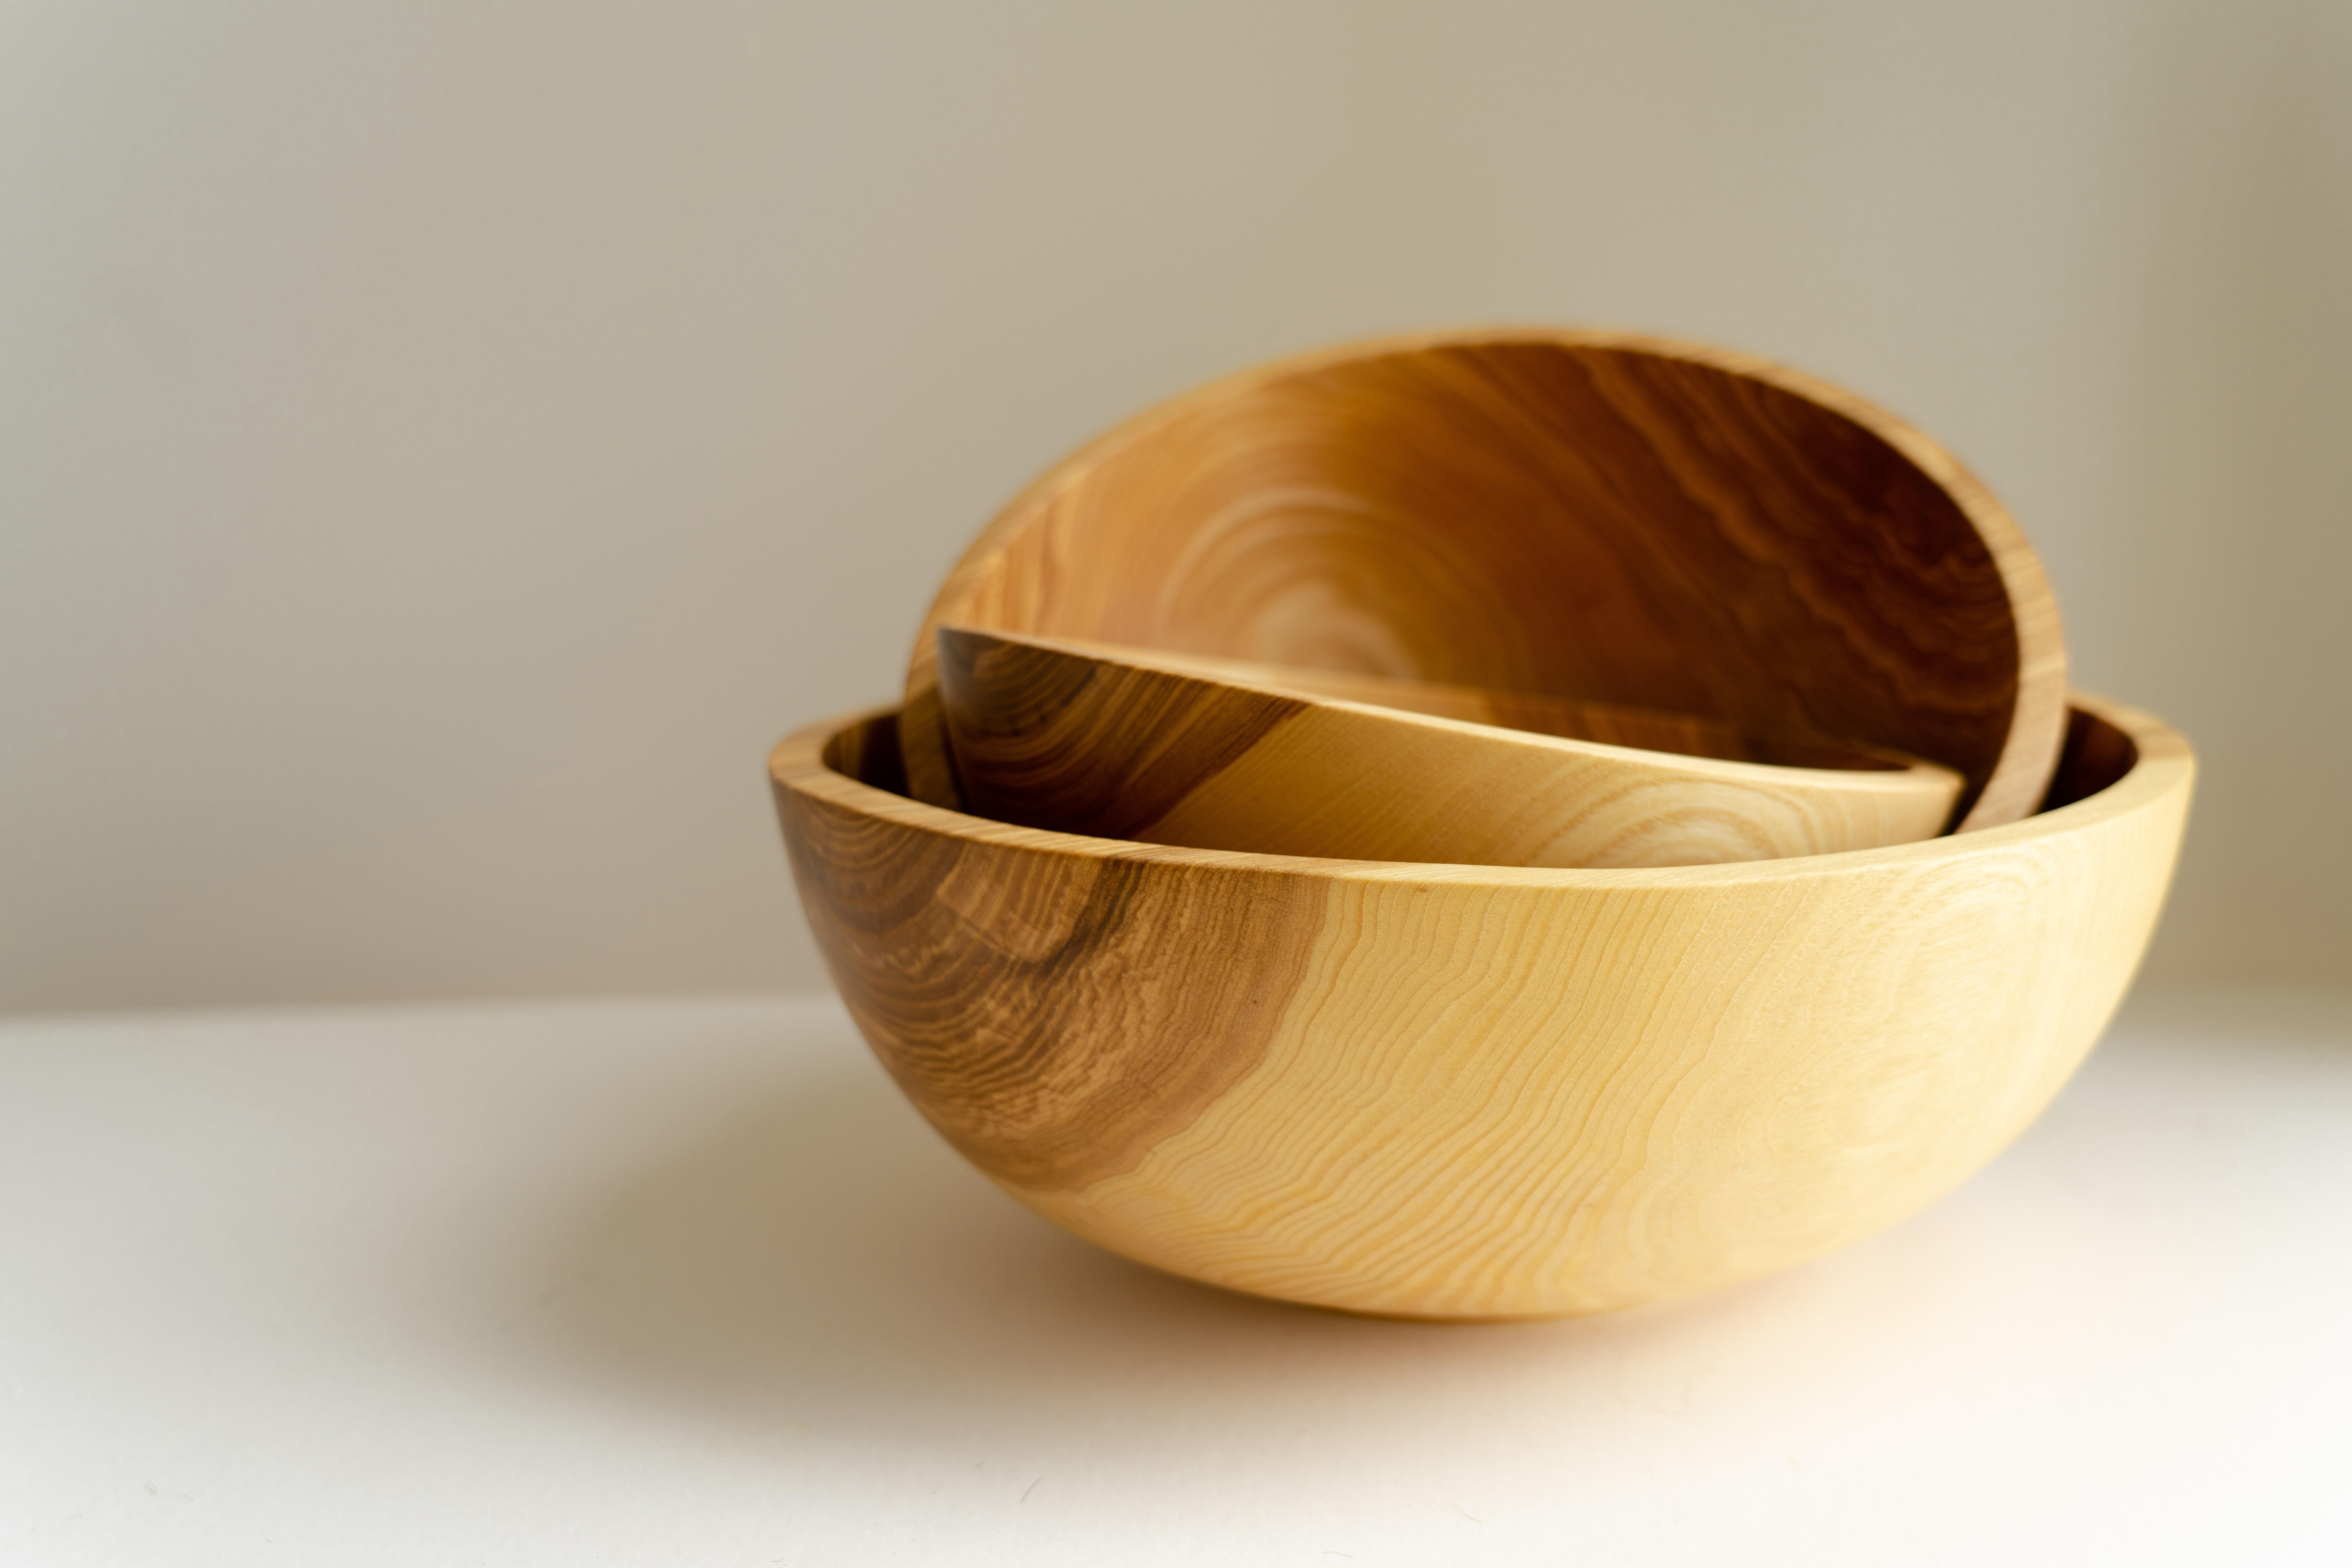 A hand-carved wood nesting bowl set will become a real friend in any kitchen. Three different-sized bowls can be used for anything from serving snacks to showcasing the fruits and veggies on the dinner table. Hand-carved from one solid piece of